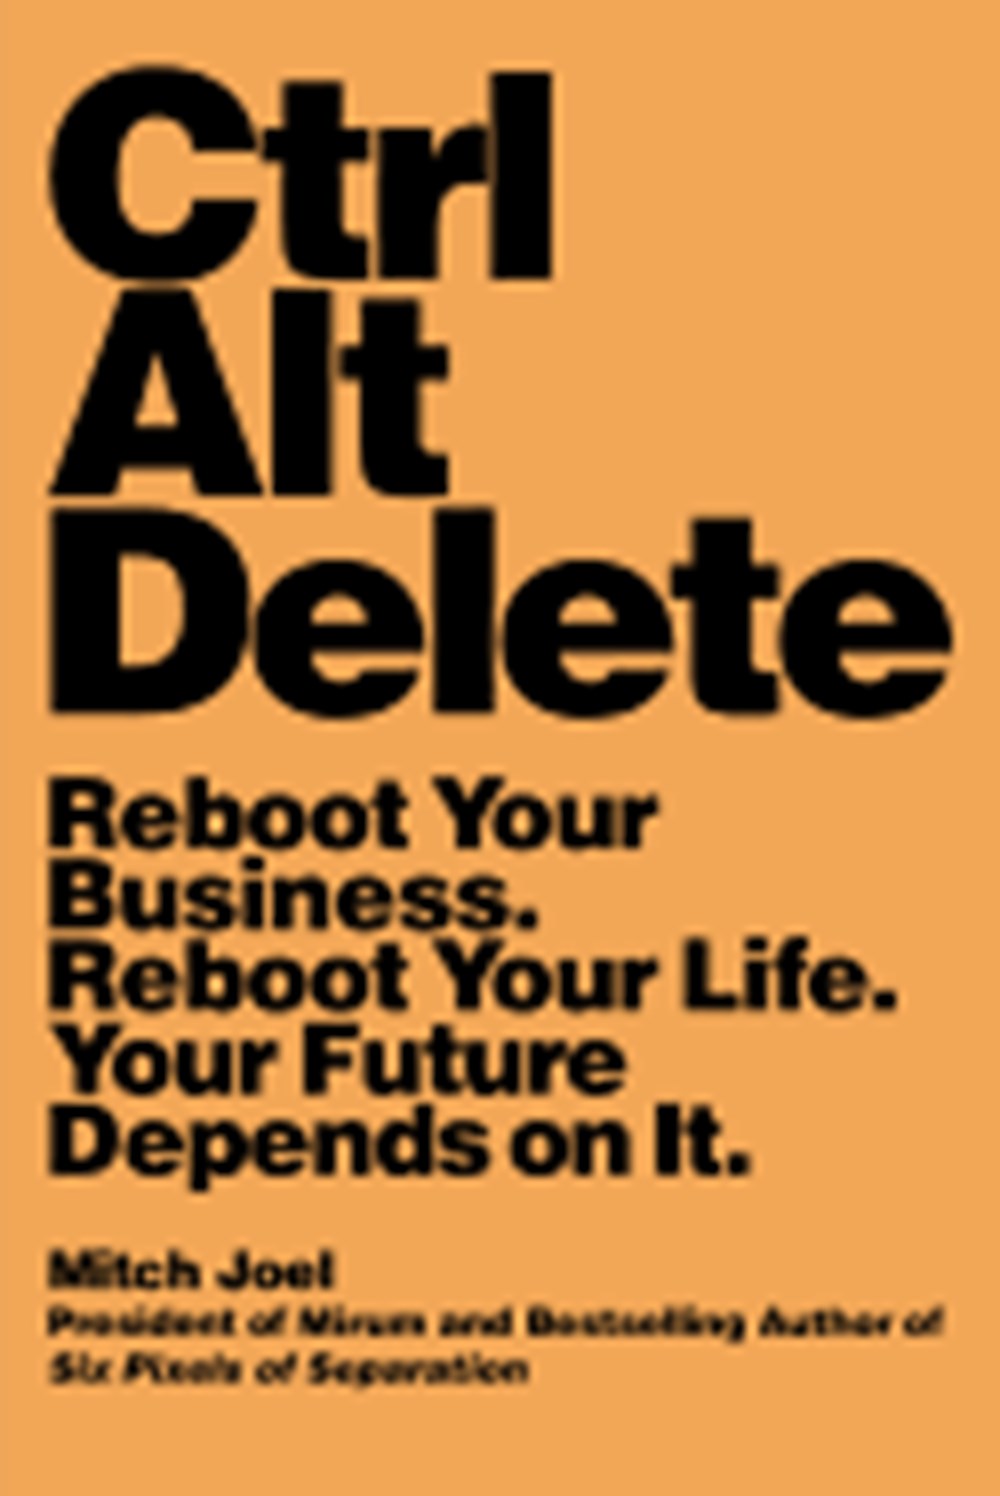 Ctrl Alt Delete Reboot Your Business. Reboot Your Life. Your Future Depends on It.